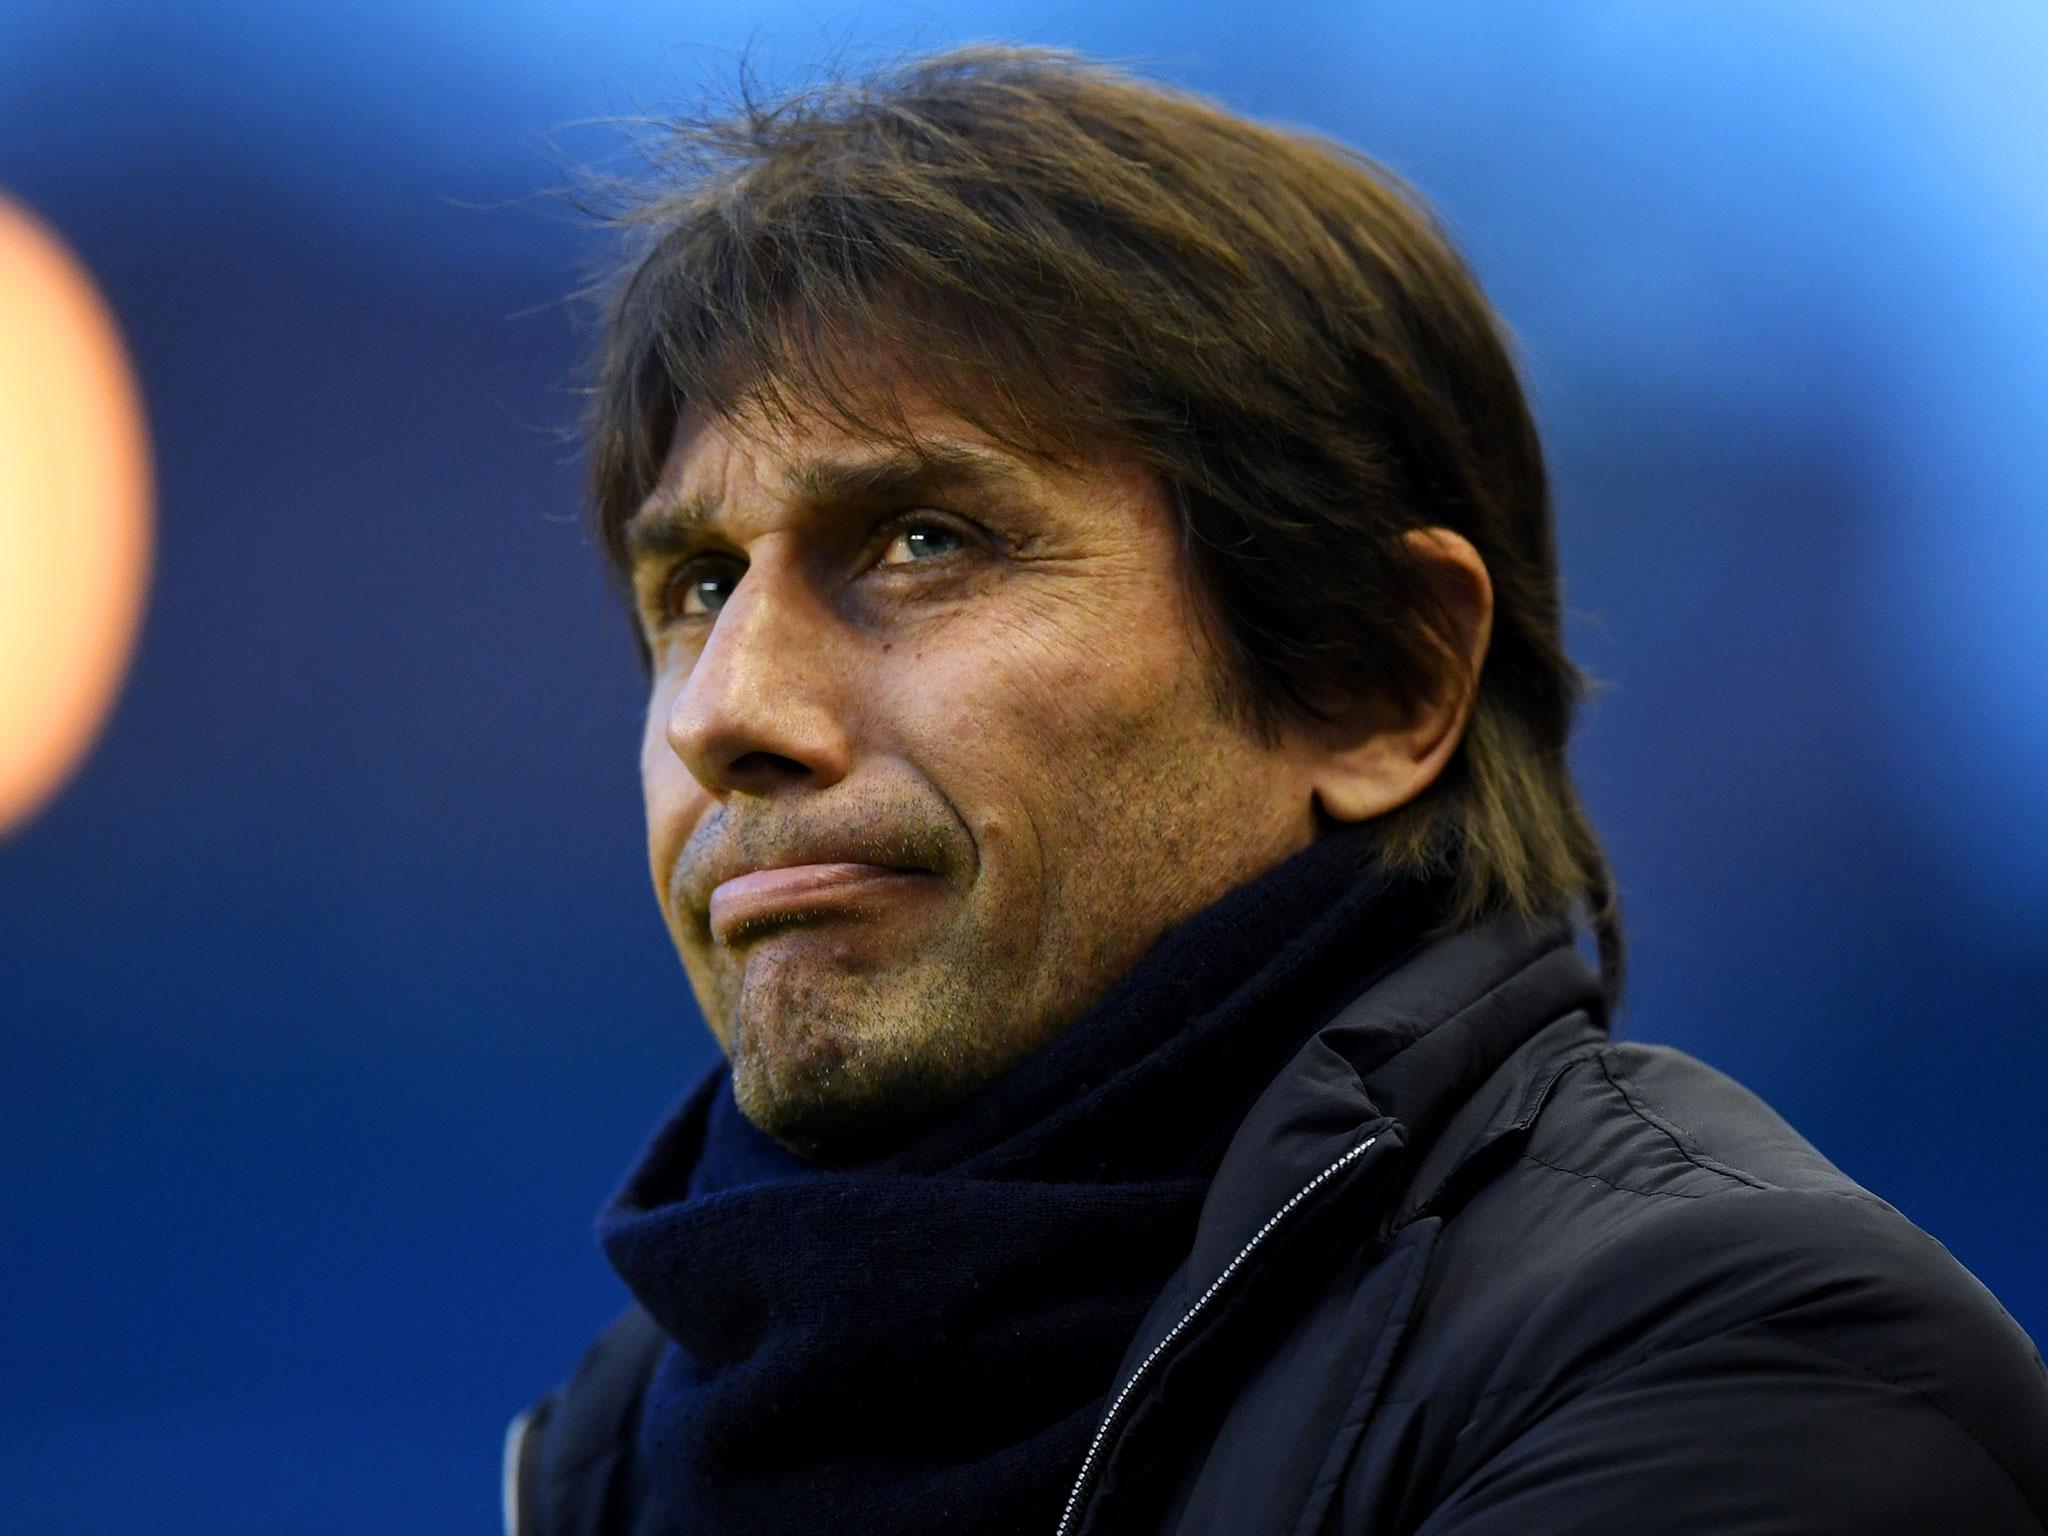 Antonio Conte has no interest in speaking to Inter Milan because his future lies at Chelsea